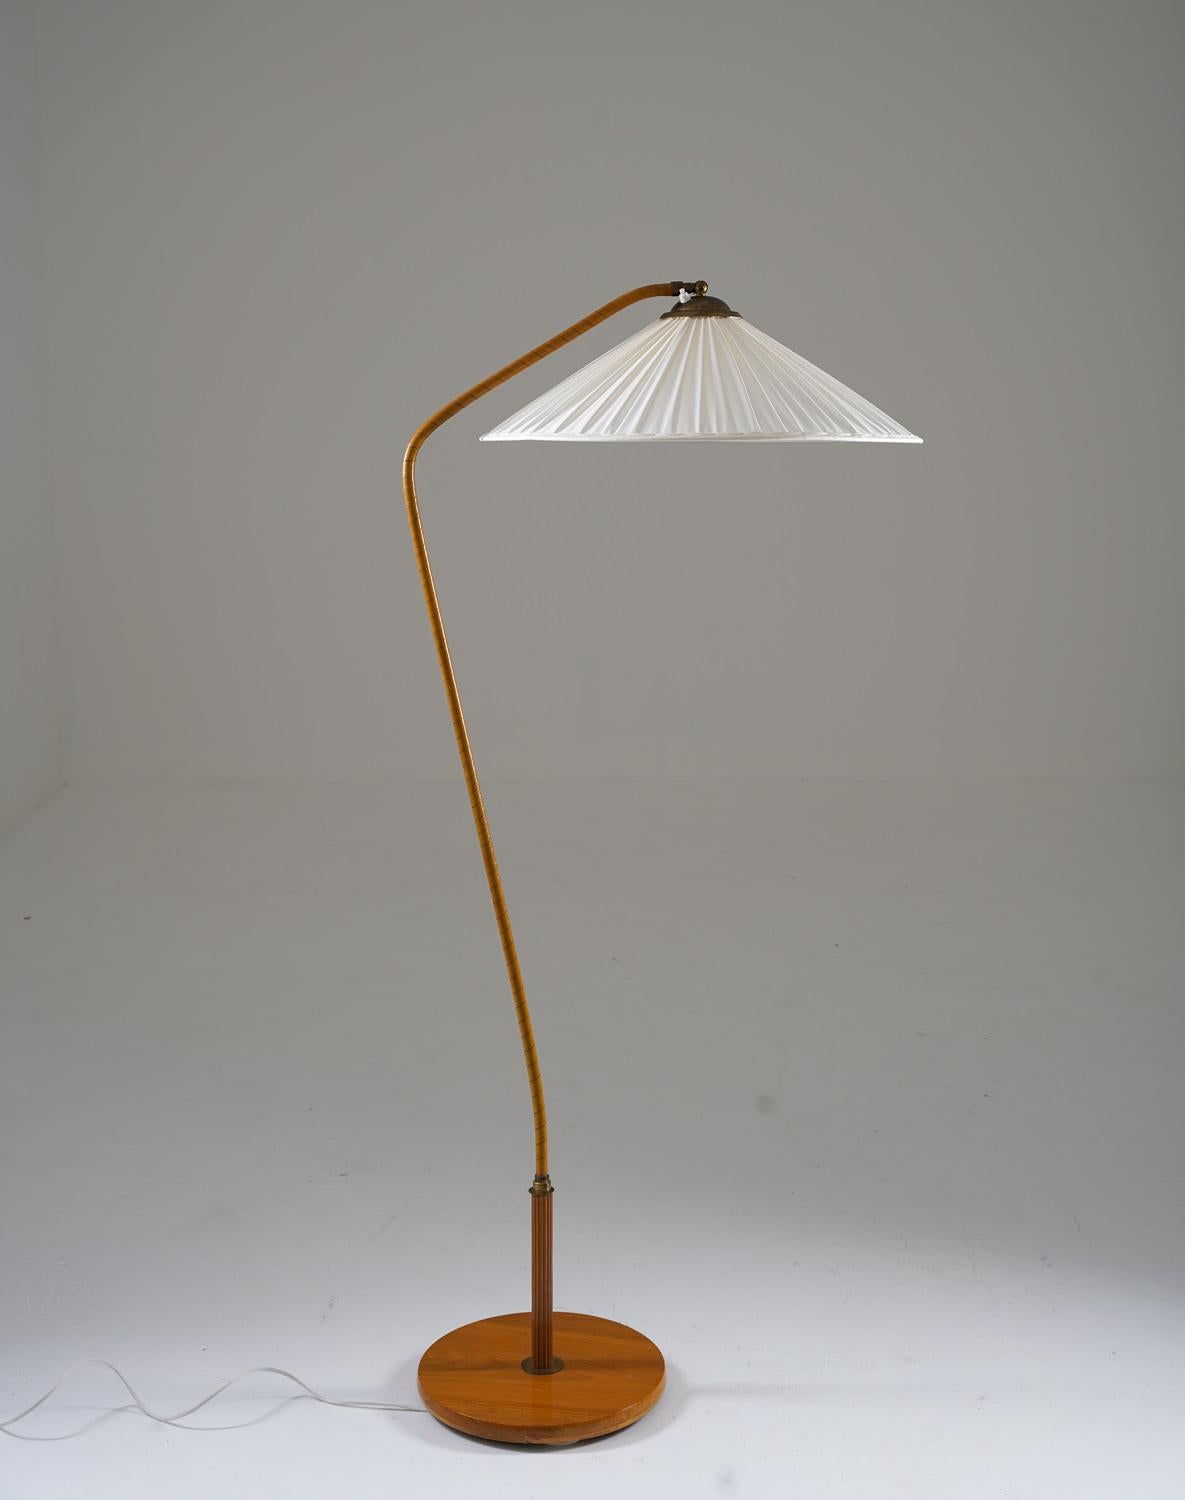 Beautiful floor lamp, manufactured in Sweden ca 1940.

This floorlamp consists of a beautifully curved pole, webbed in original cognac-colored faux leather. The pole is supported by a large wooden foot with brass details. The impressive fabric